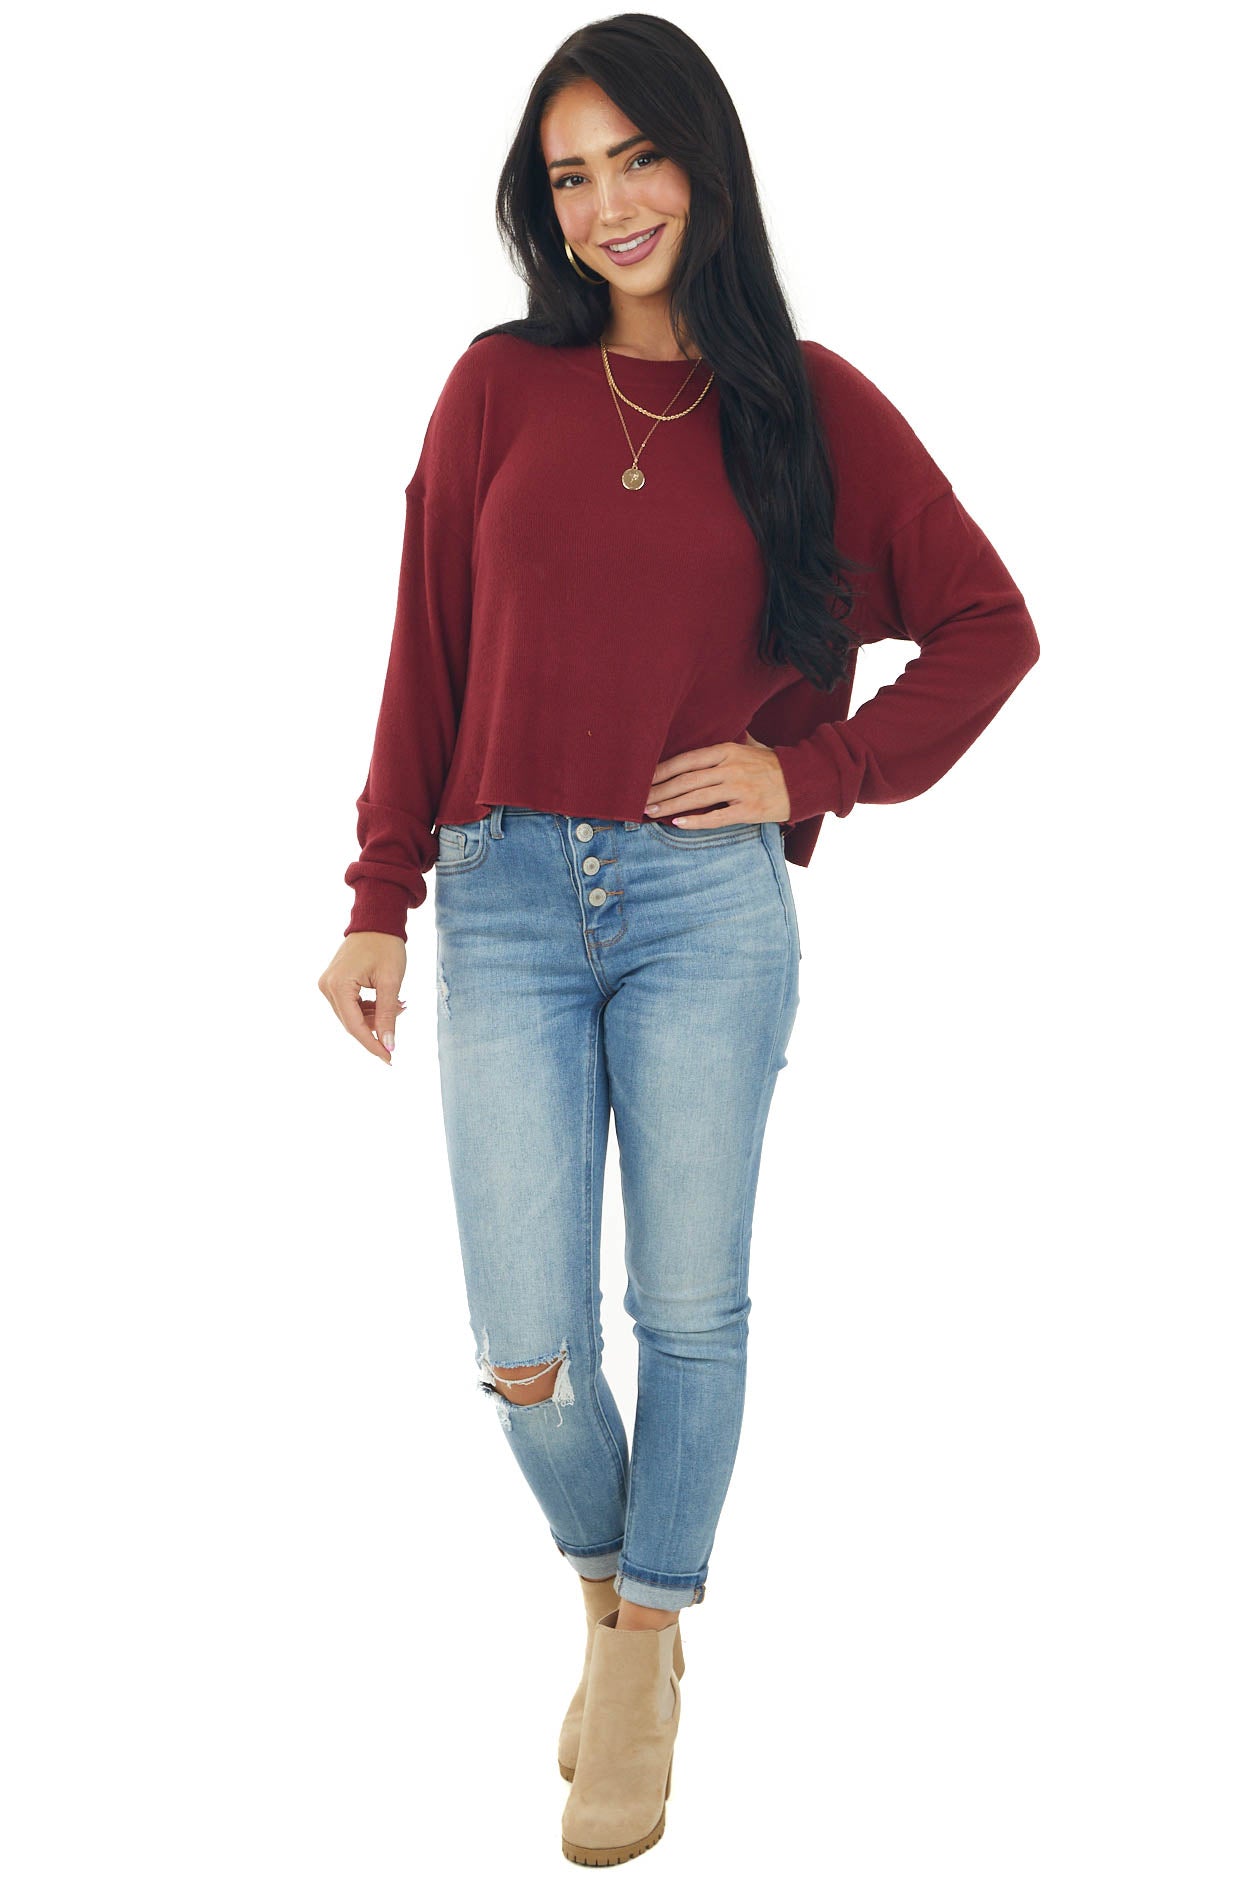 Burgundy Soft Ribbed Knit Long Sleeve Top